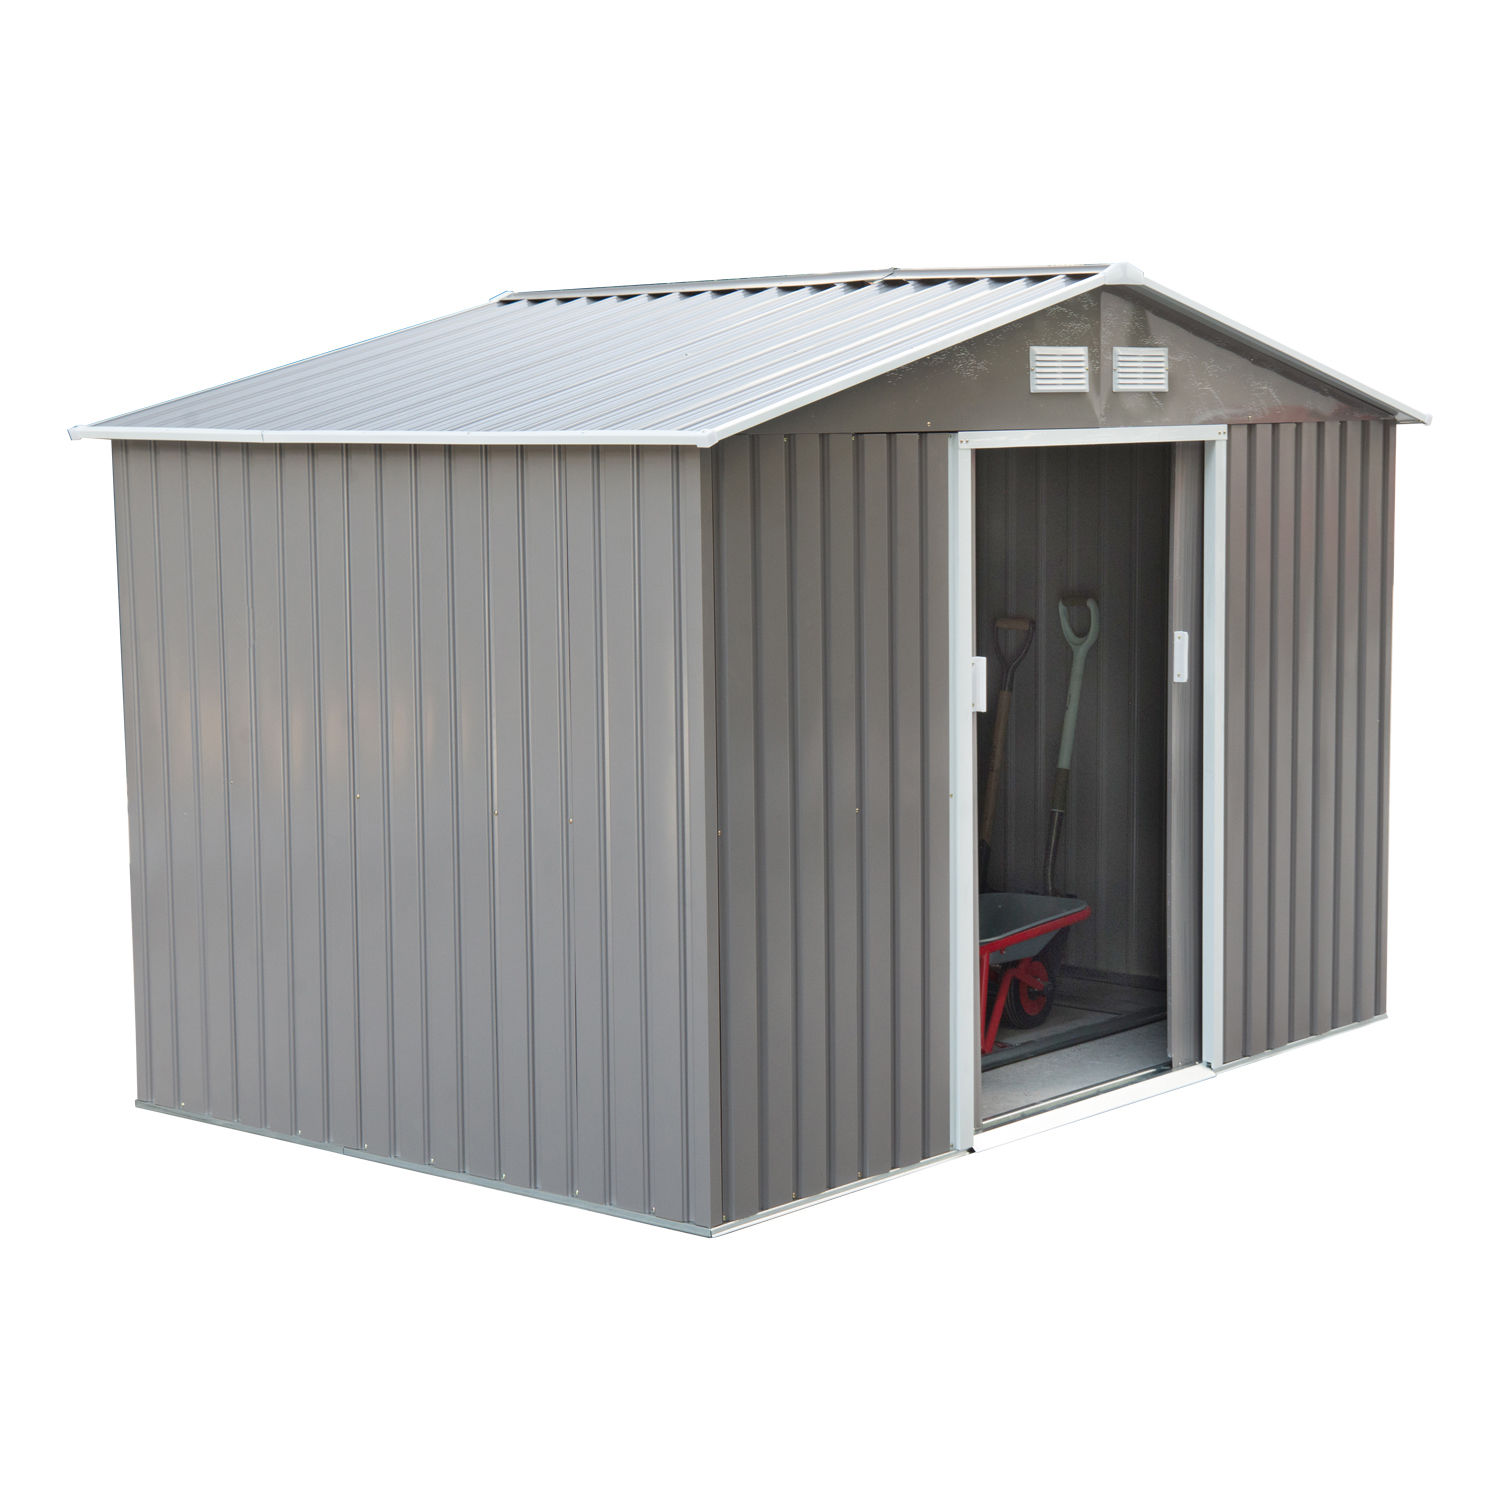 Outsunny 9' x 6' Metal Outdoor Utility Storage Tool Shed, 6.3 ft x 9.1 ft, Grey - image 1 of 11